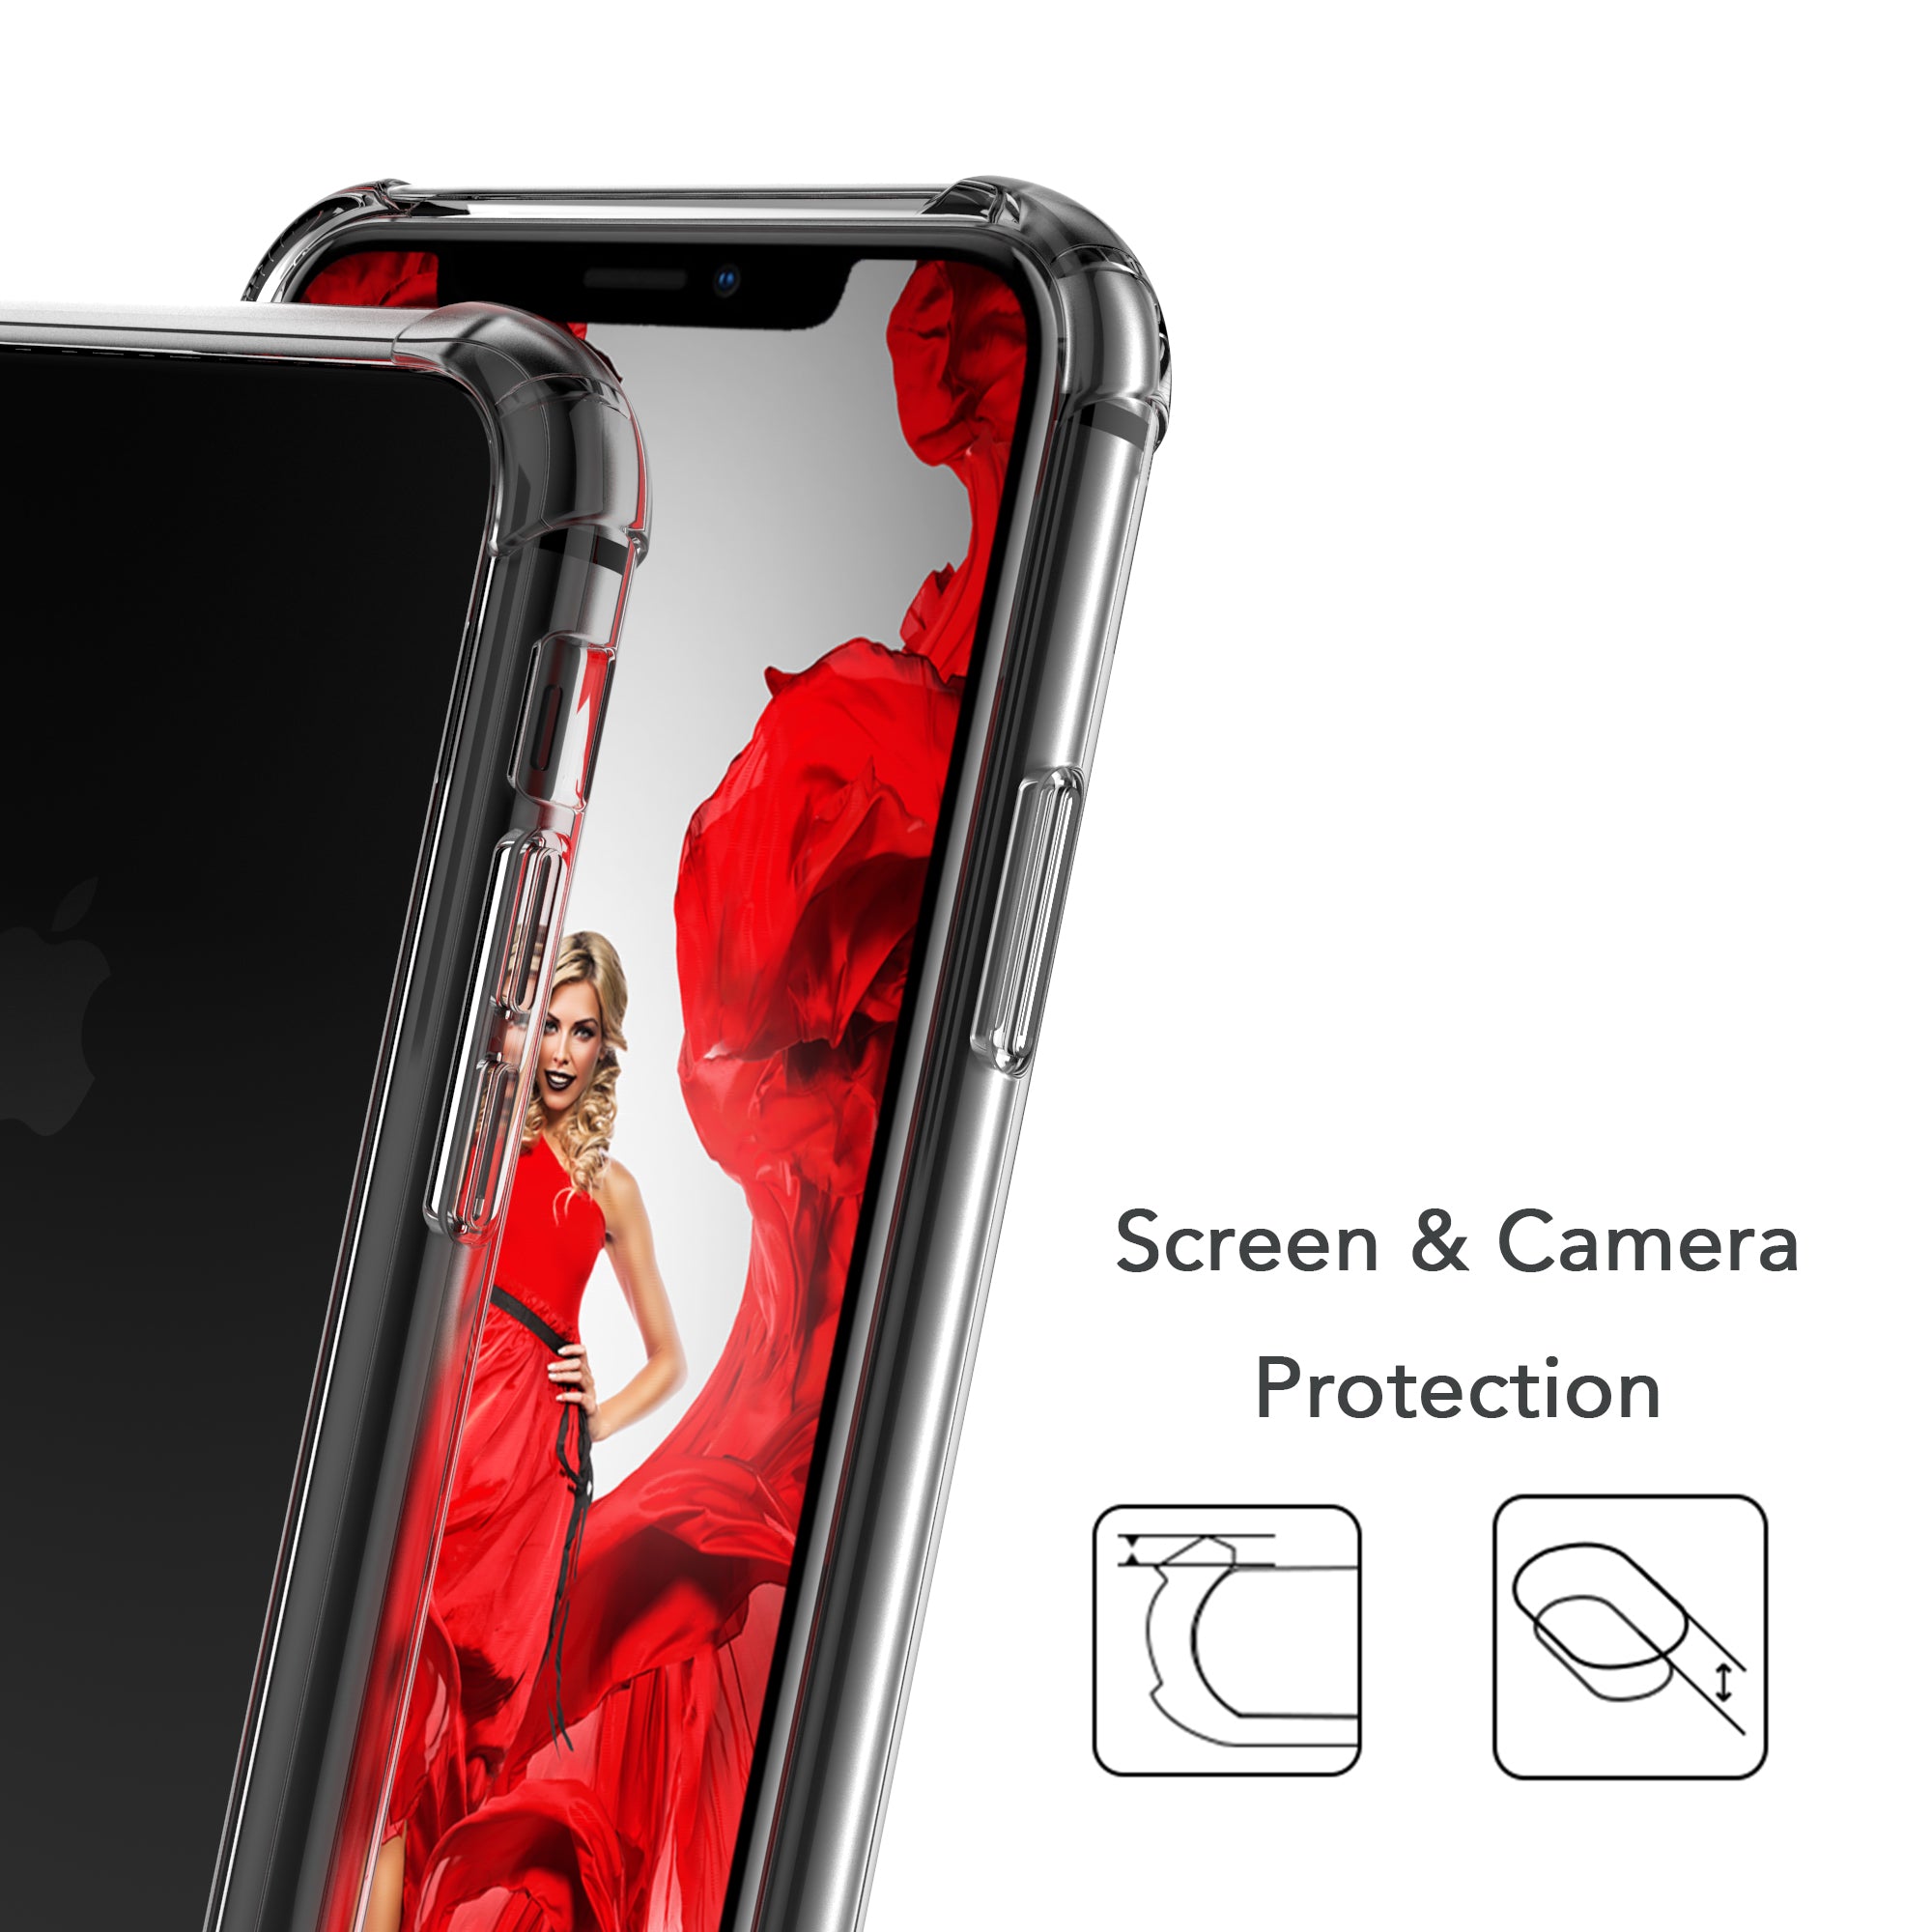 Luvvitt Crystal View Case and Tempered Glass  Set for iPhone XR - 6.1 inch 2018